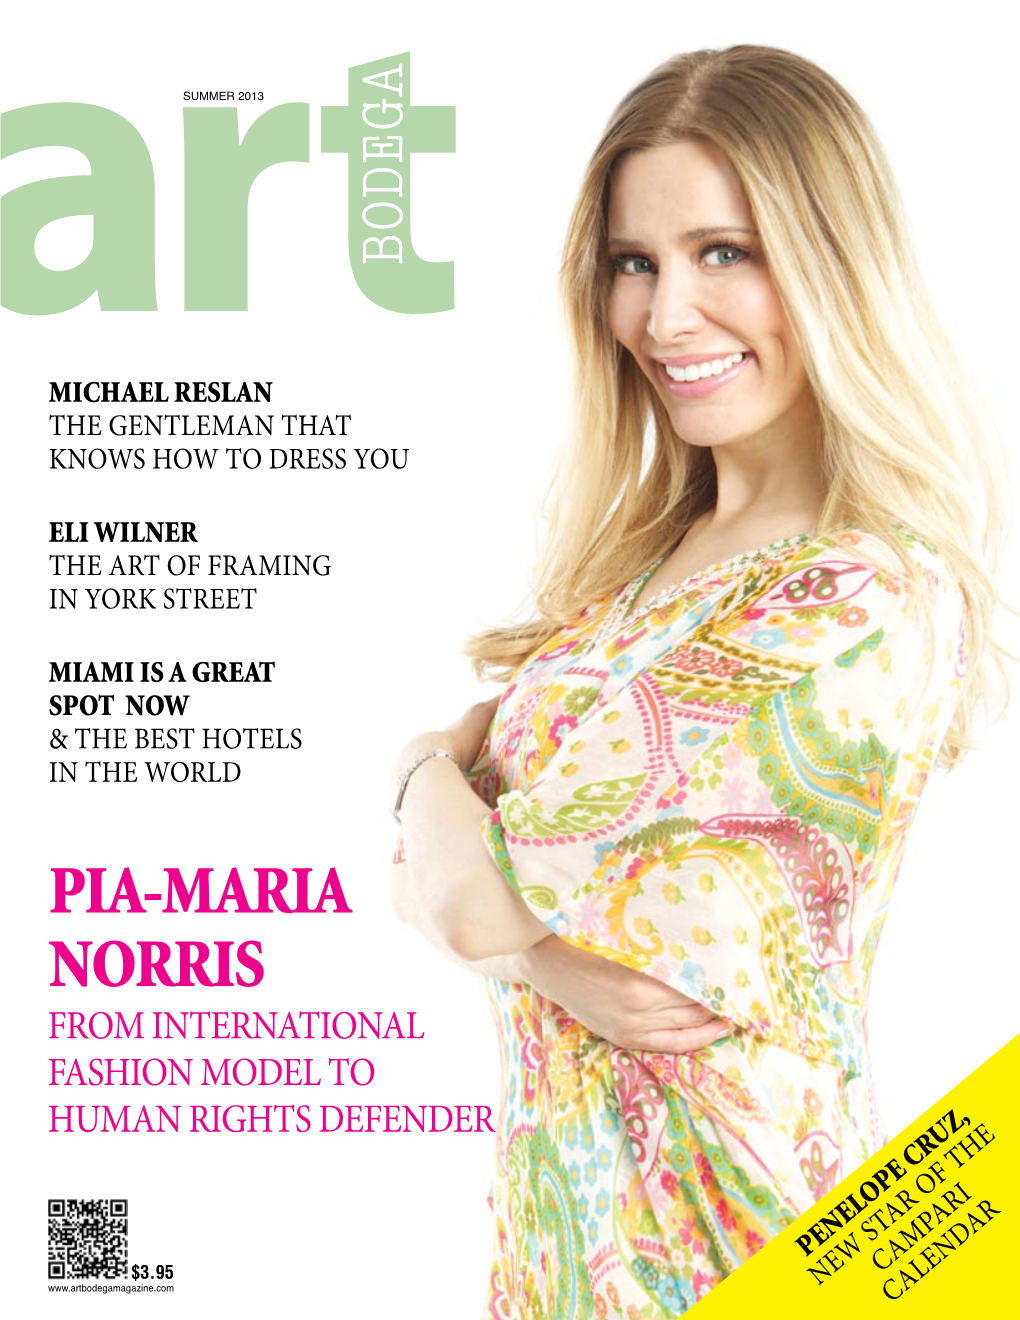 PIA-MARIA NORRIS from International Fashion Model To